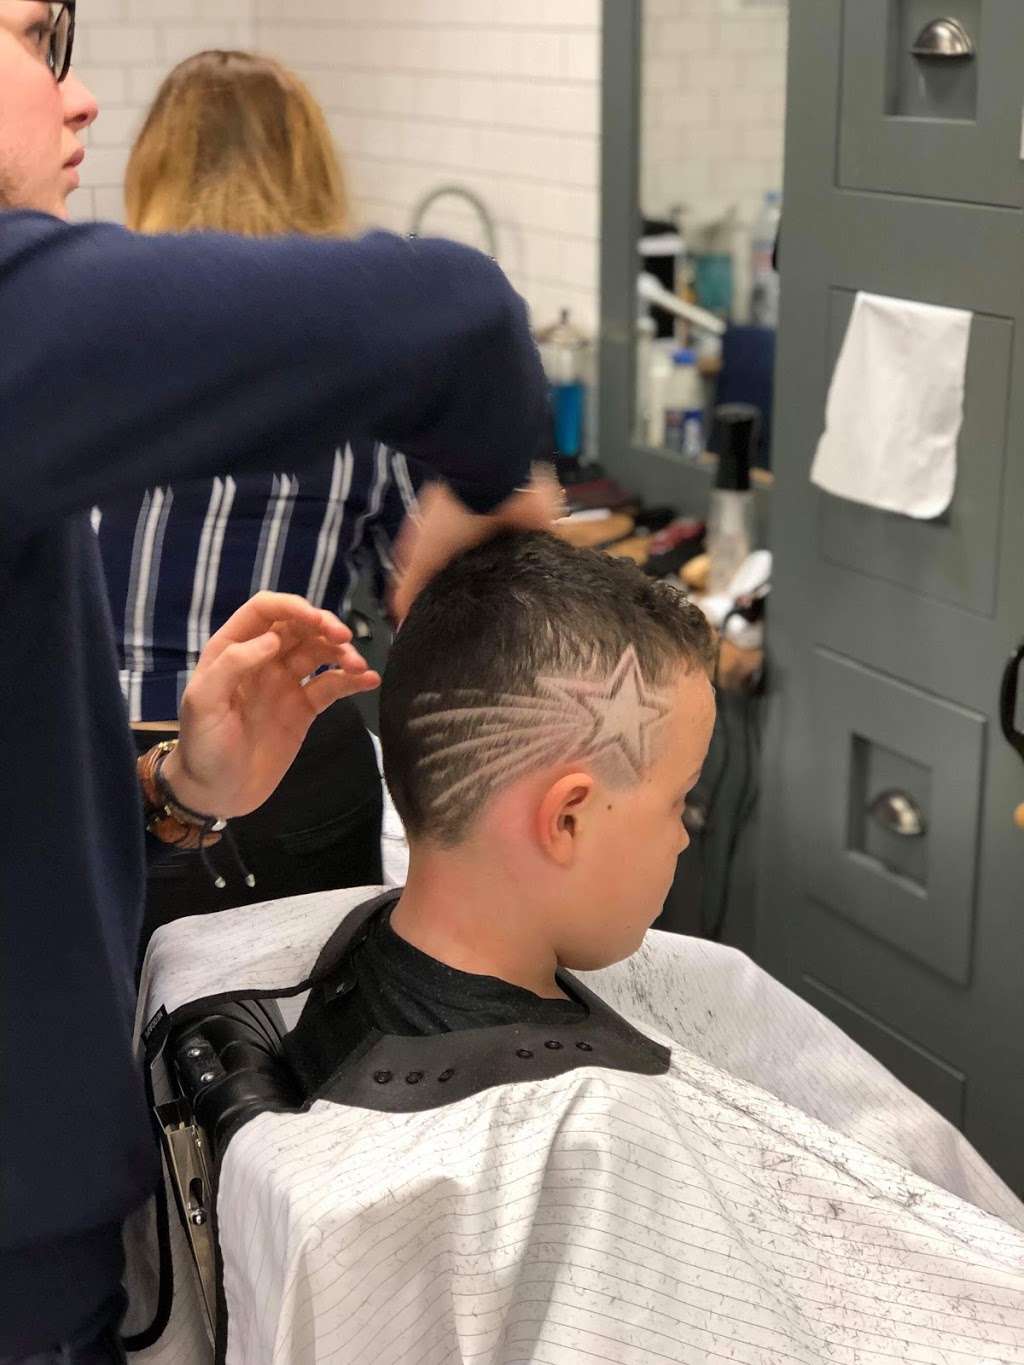 Gould Barbers - Gatwick | Reigate Rd, Horley RH6 0AT, UK